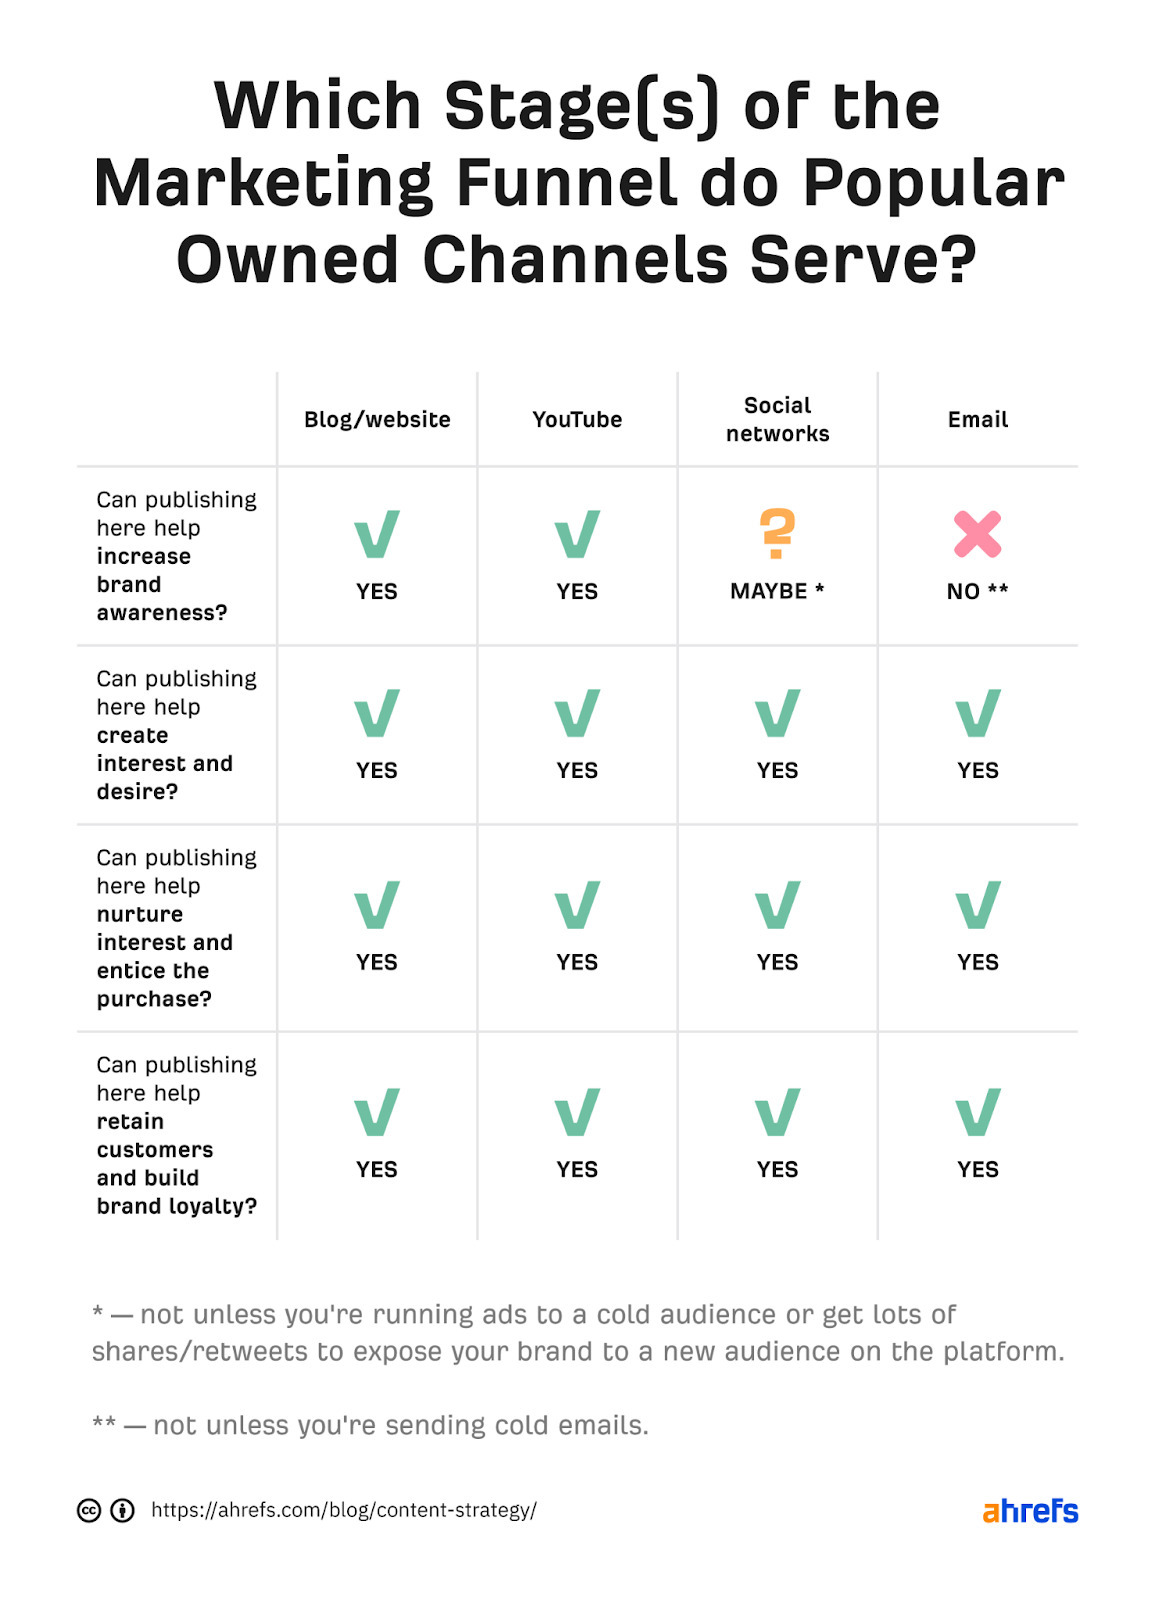 Cheat sheet (table form) to help determine which stages of the marketing funnel popular owned channels serve 